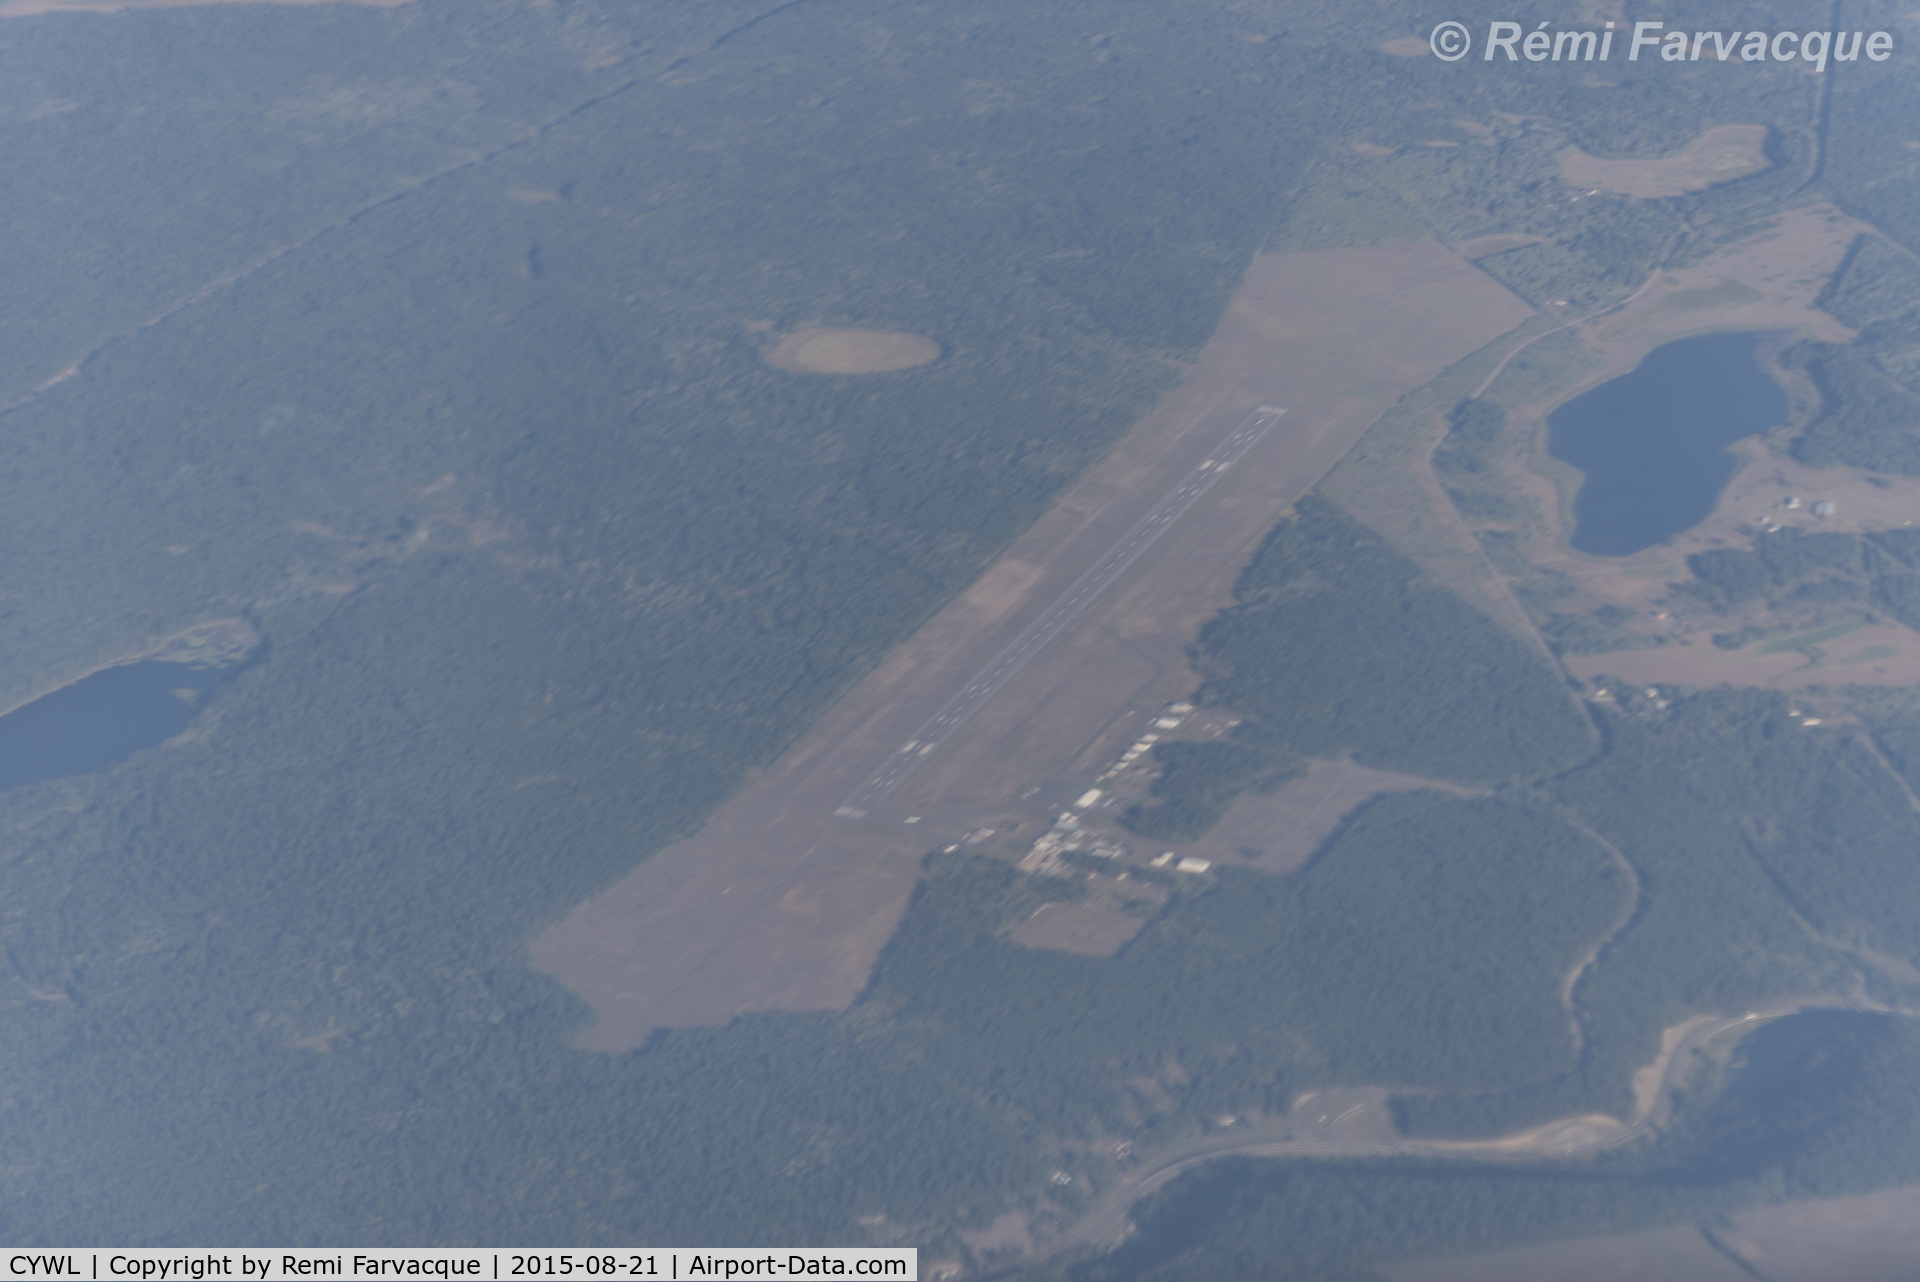 Williams Lake Airport (Williams Lake Regional Airport), Williams Lake, British Columbia Canada (CYWL) - From 24,000ft, looking to the southeast.